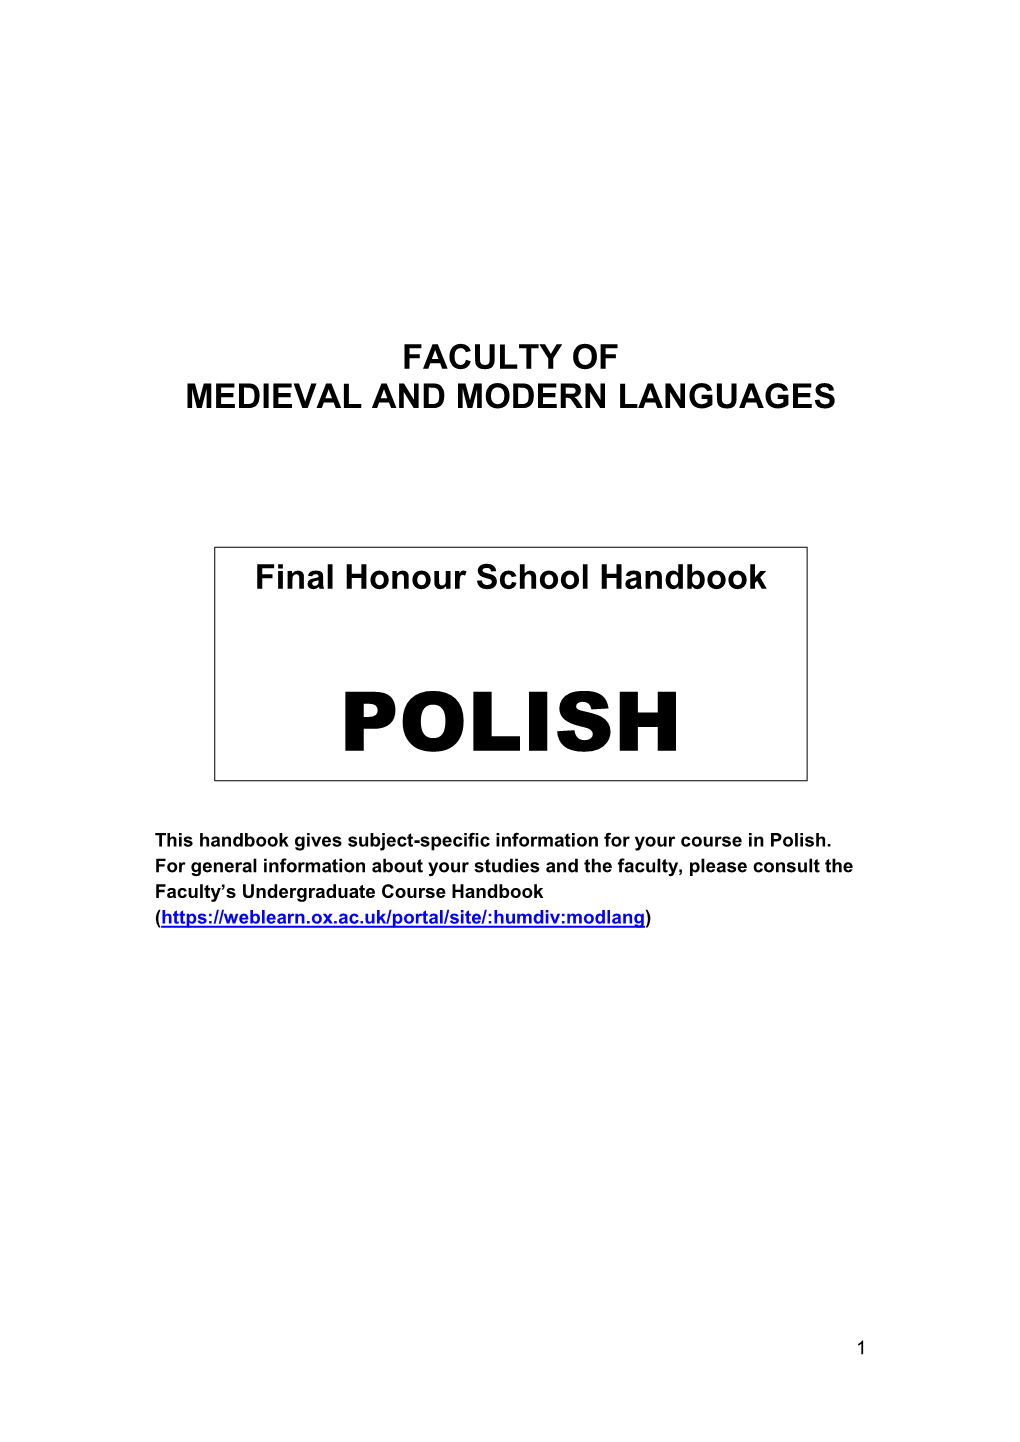 The Polish Degree Course: General